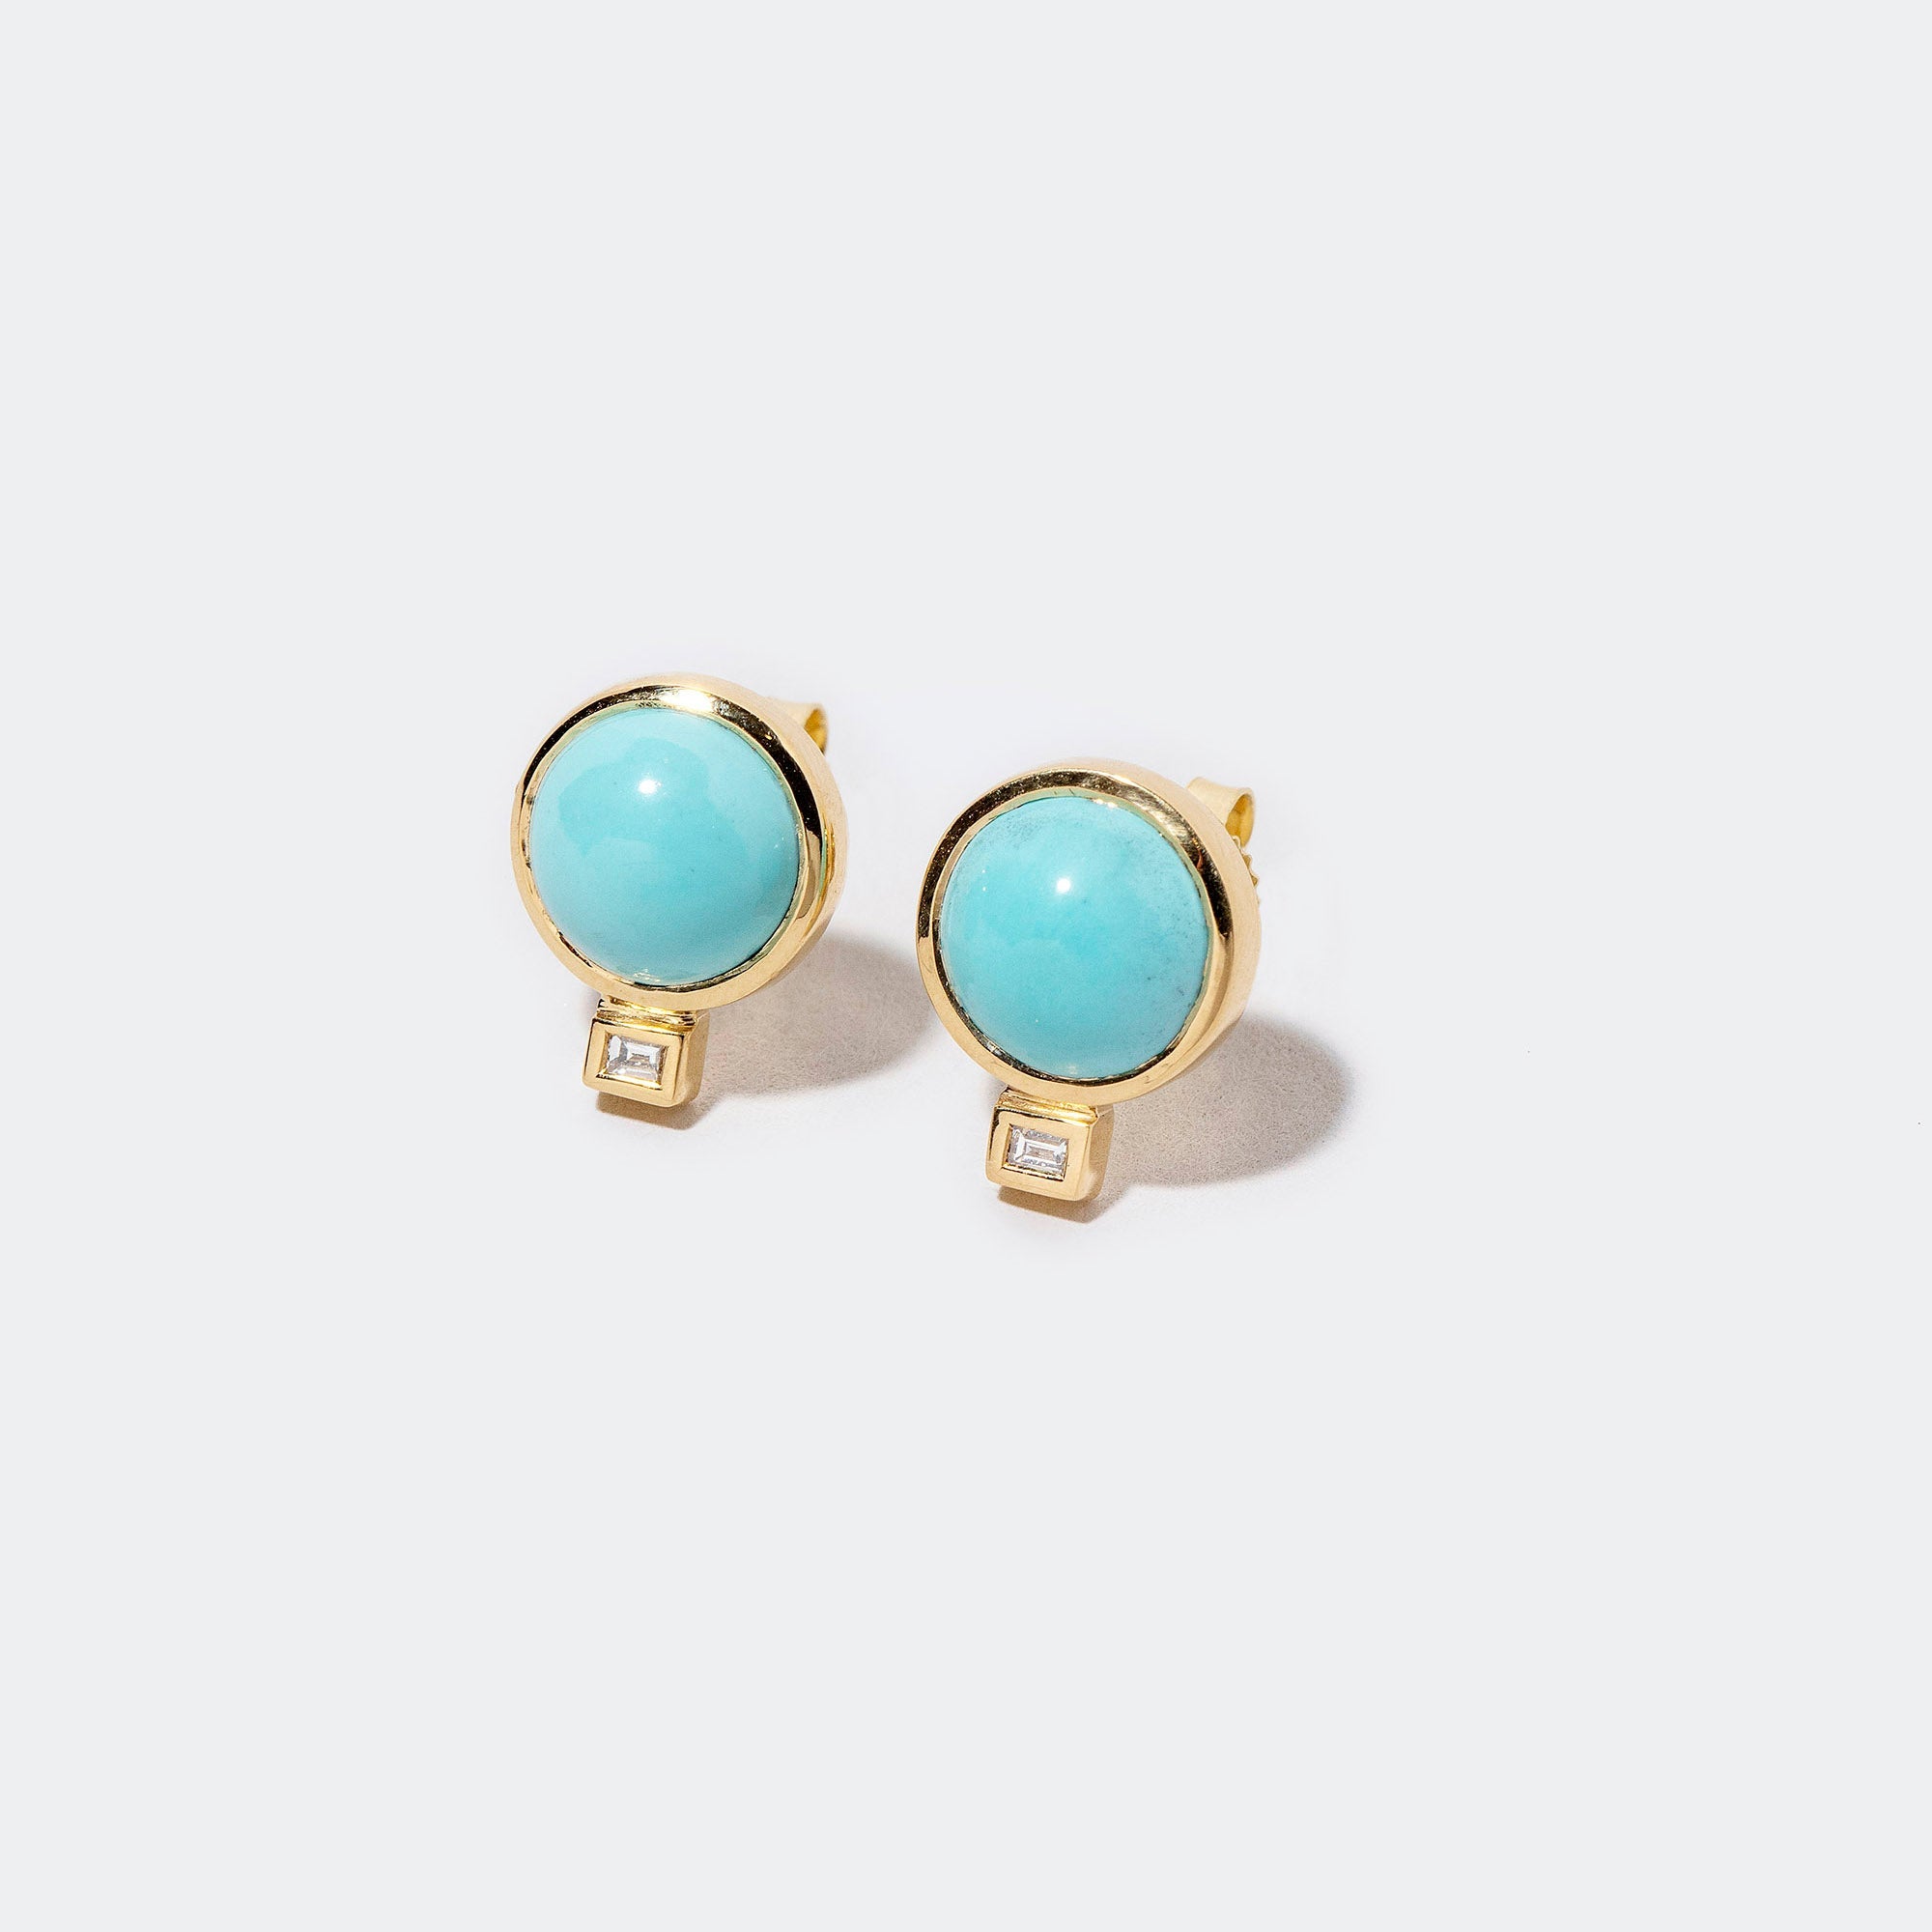 product_details:: Sky Earrings on light color background.